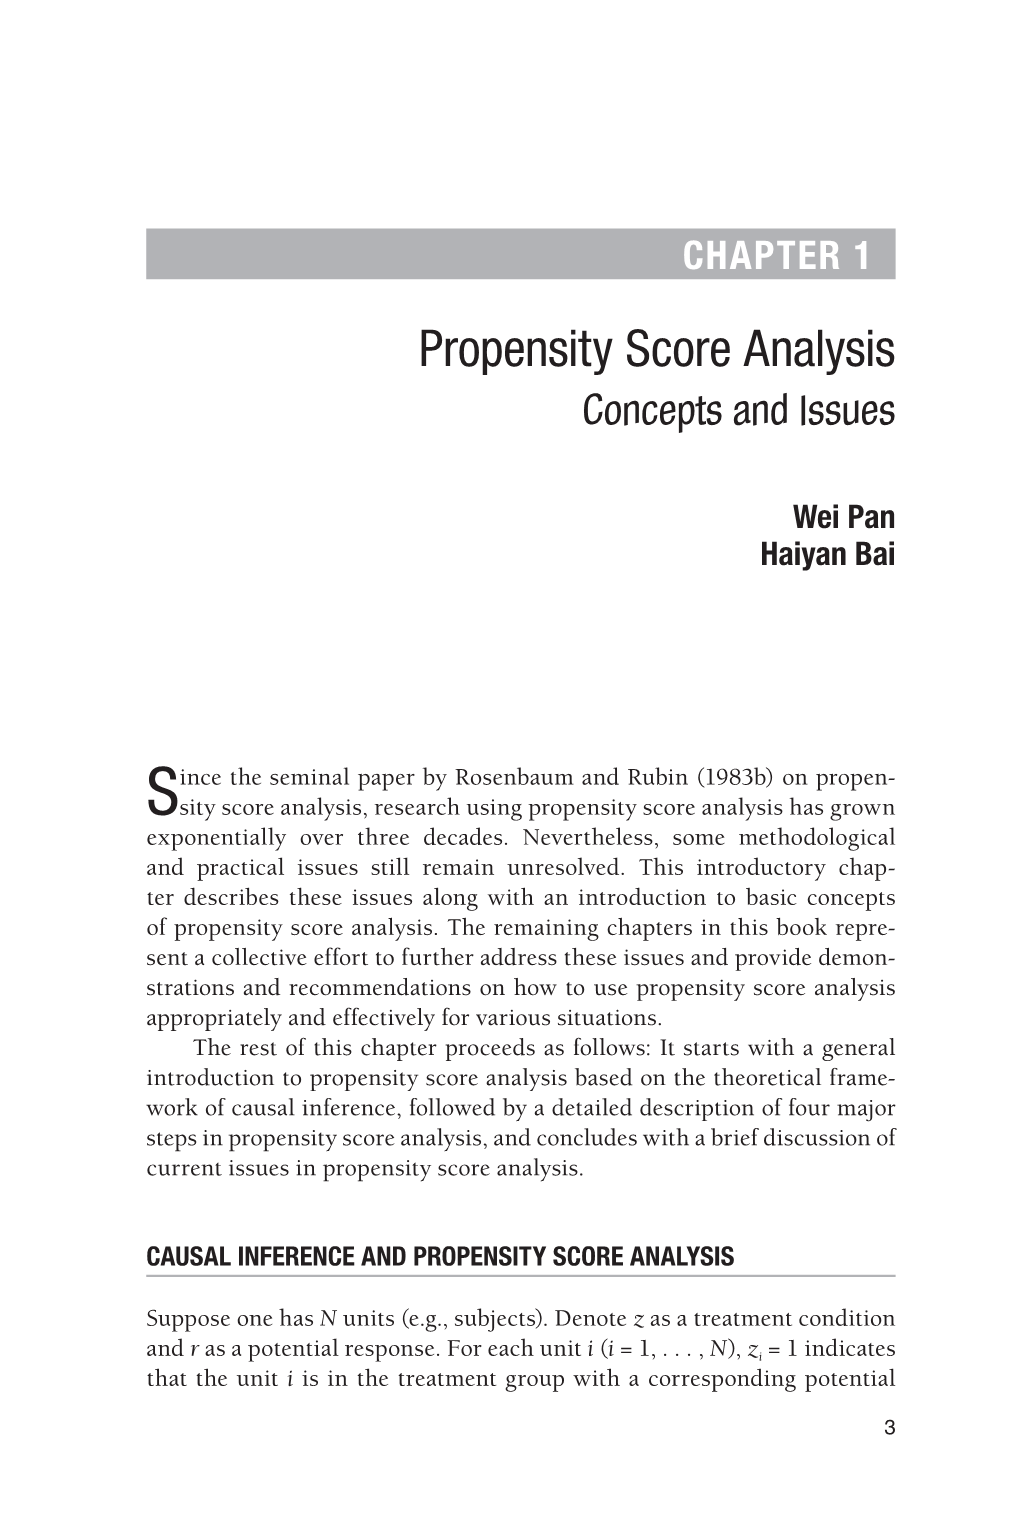 Propensity Score Analysis Concepts and Issues